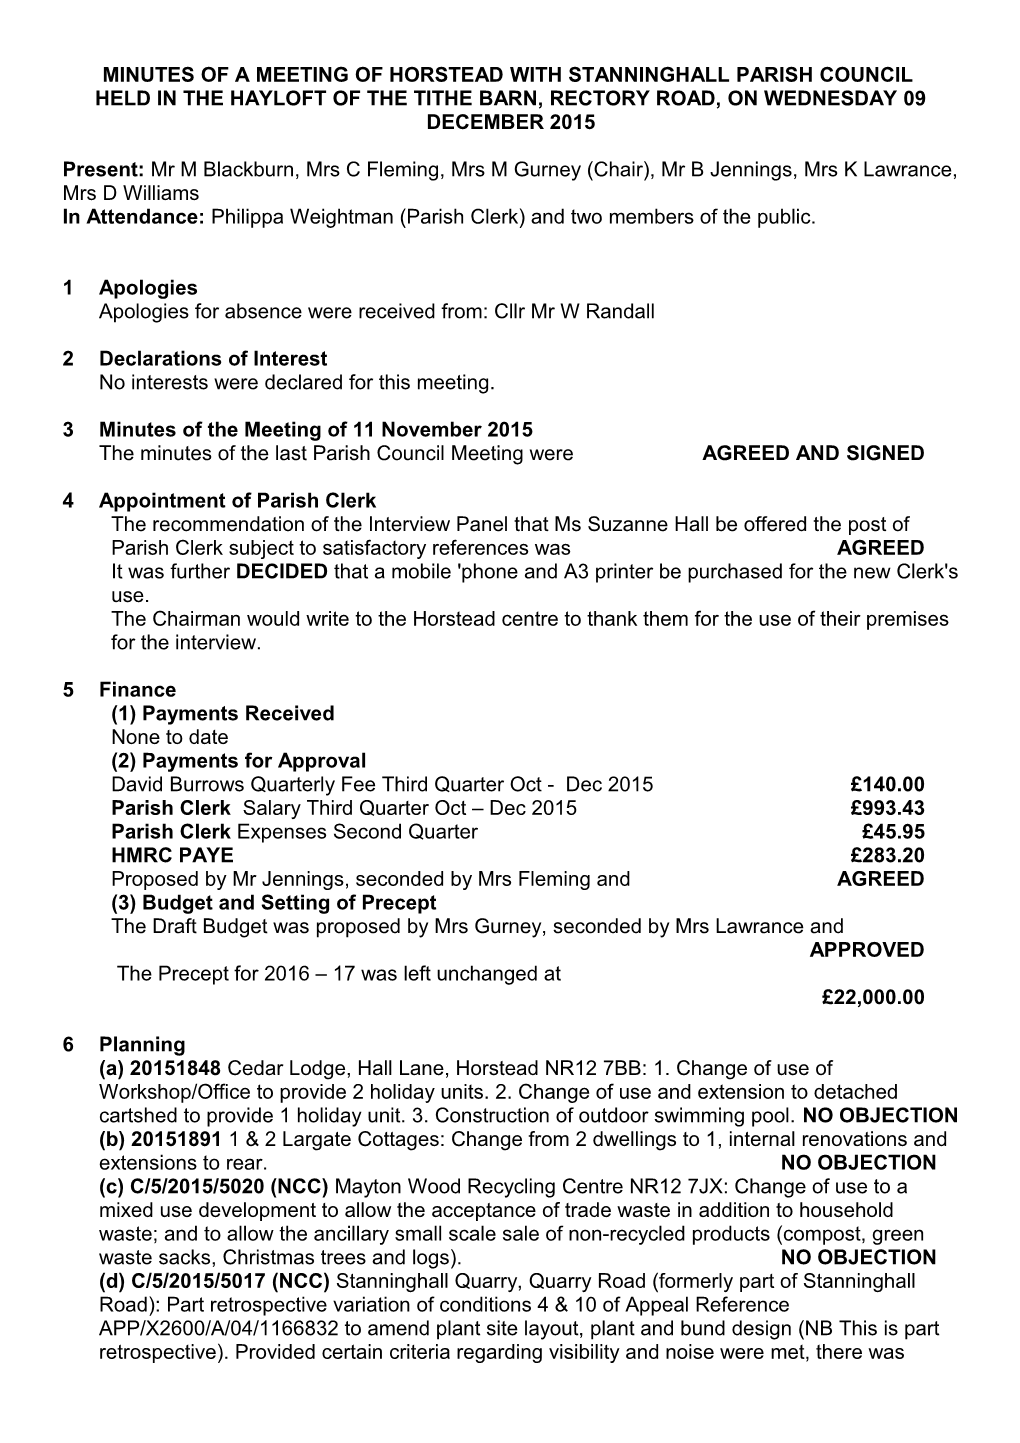 Minutes of a Meeting of Horstead with Stanninghall Parish Council